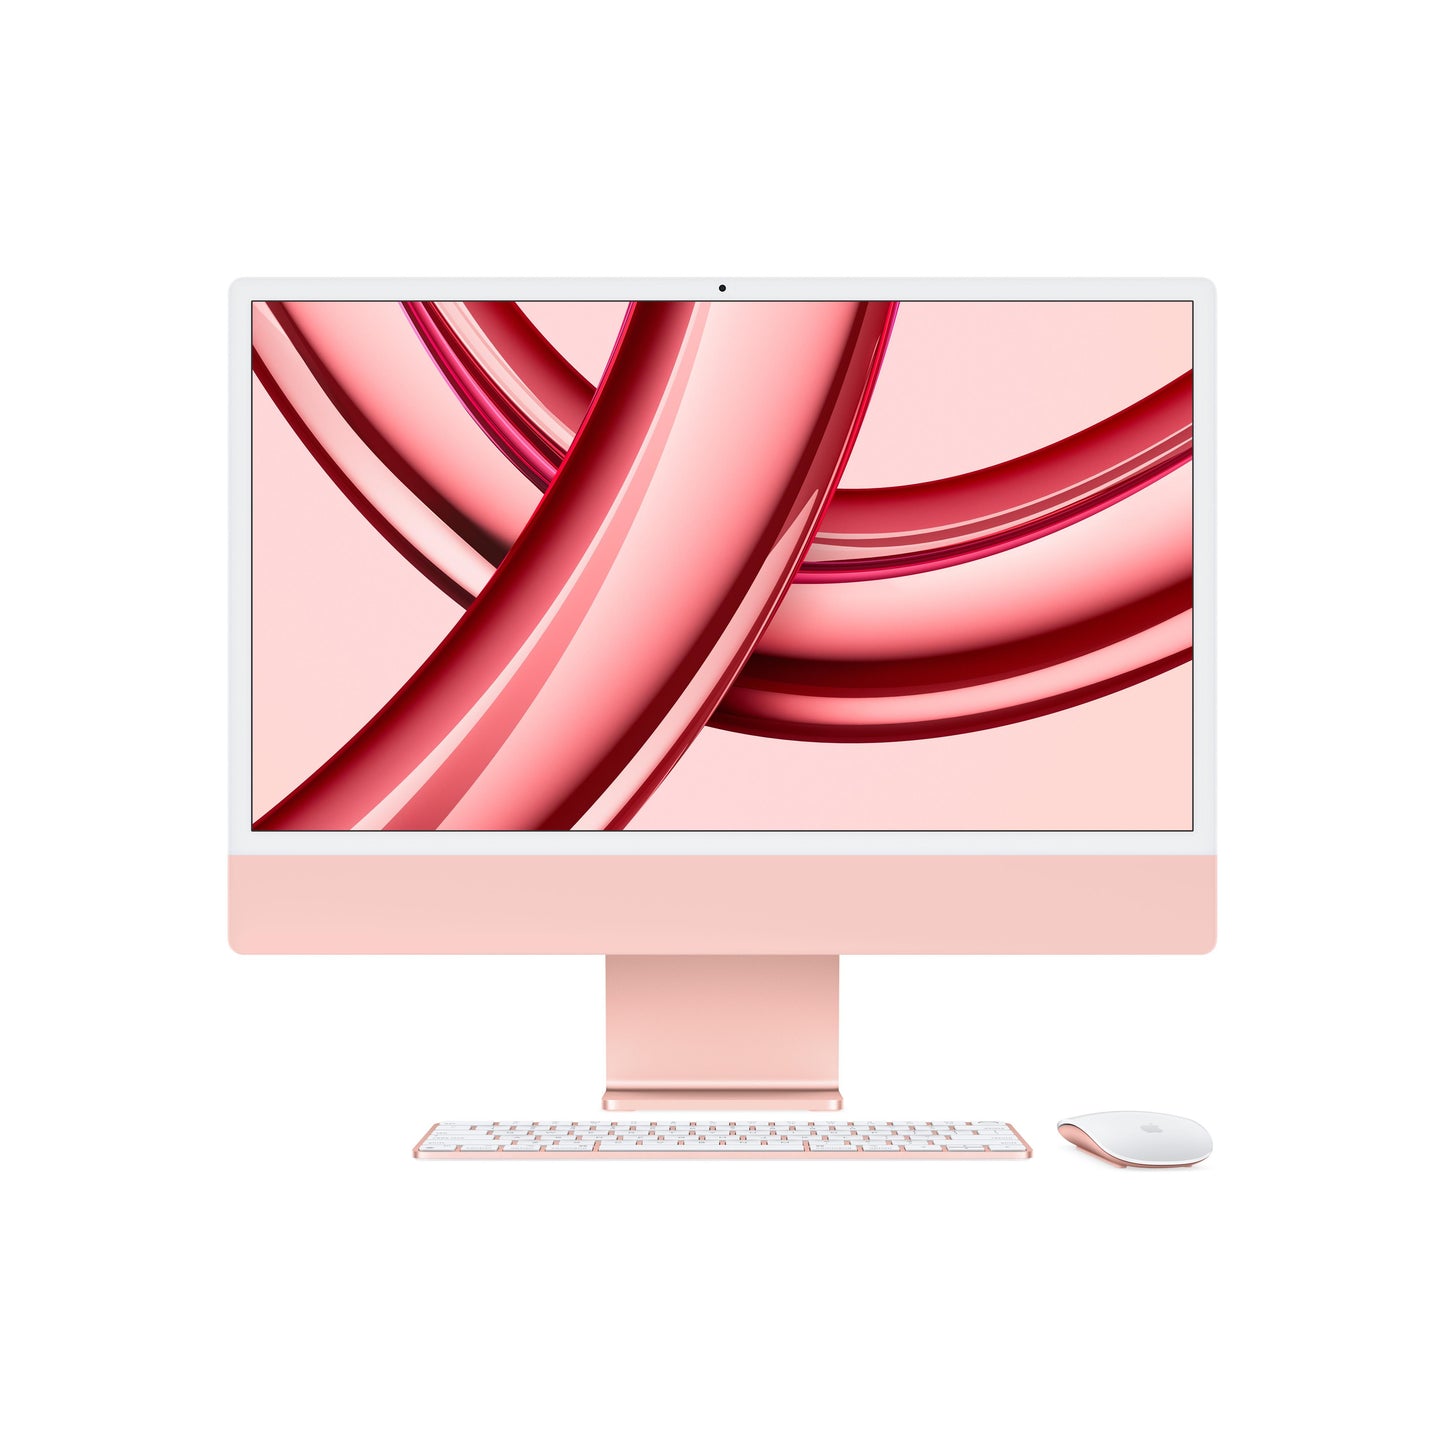 Apple M3 iMac 24-inch review: More power, same package